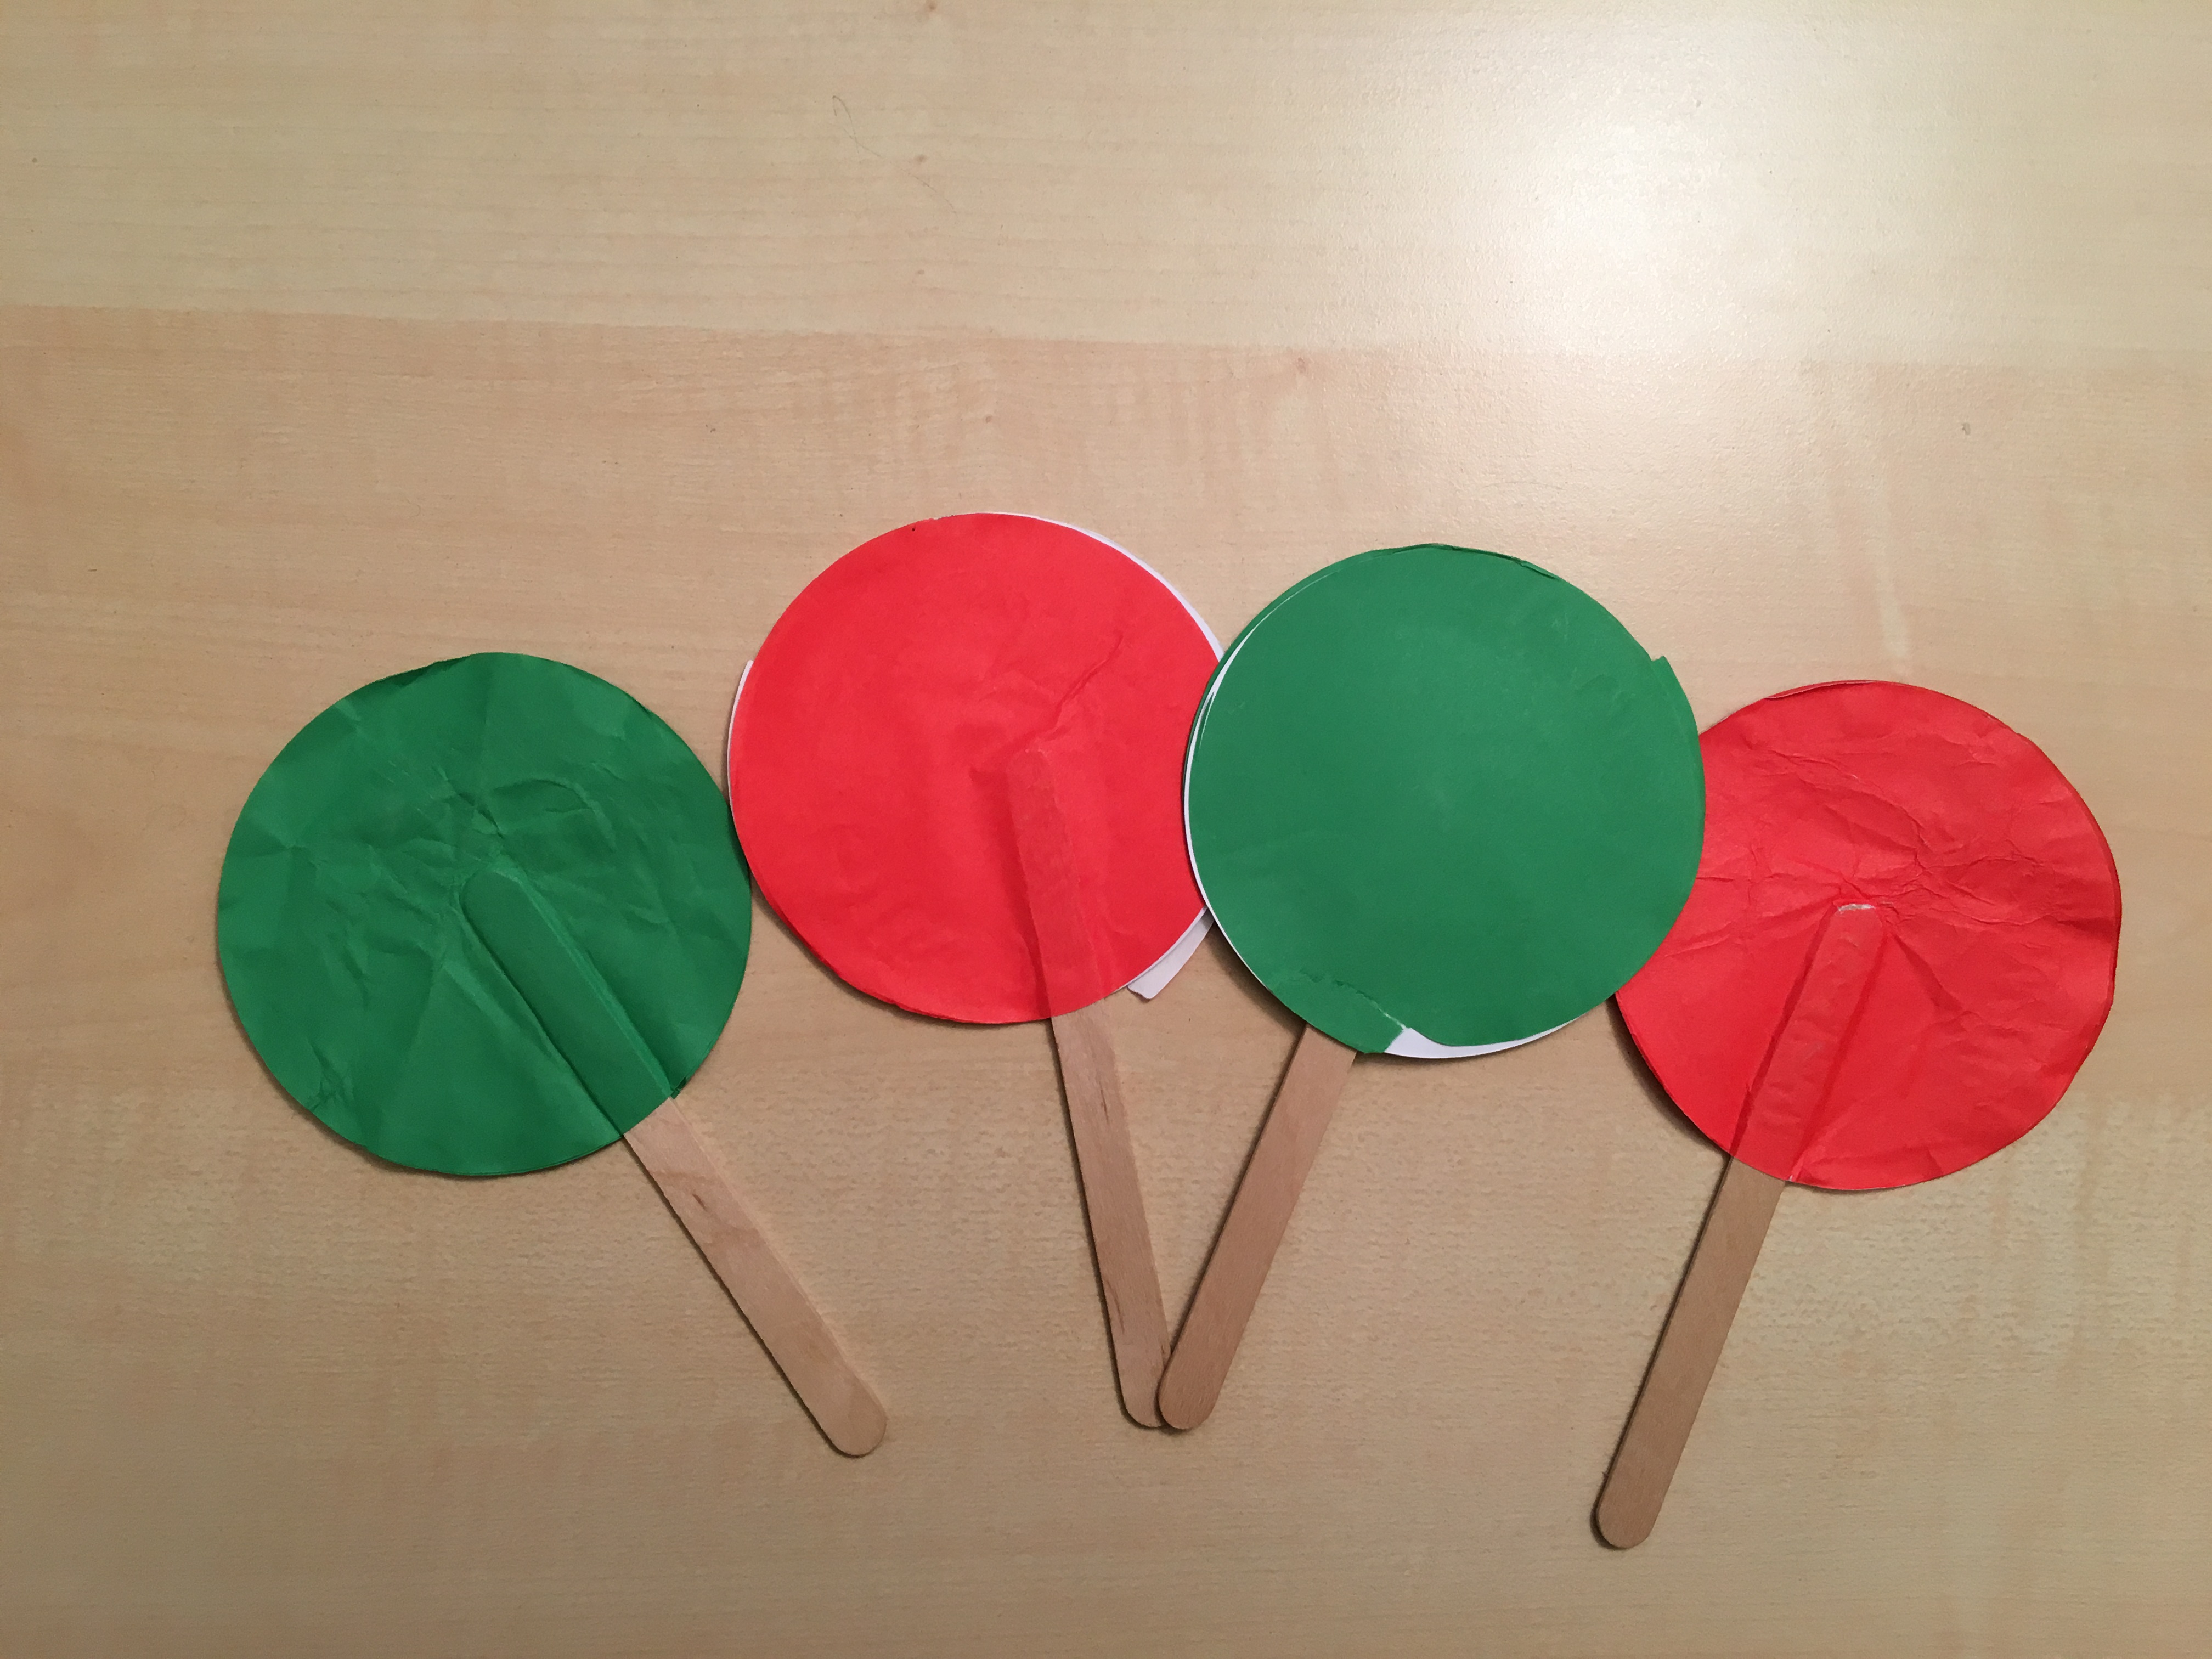 "Traffic Light" game for learning Chinese